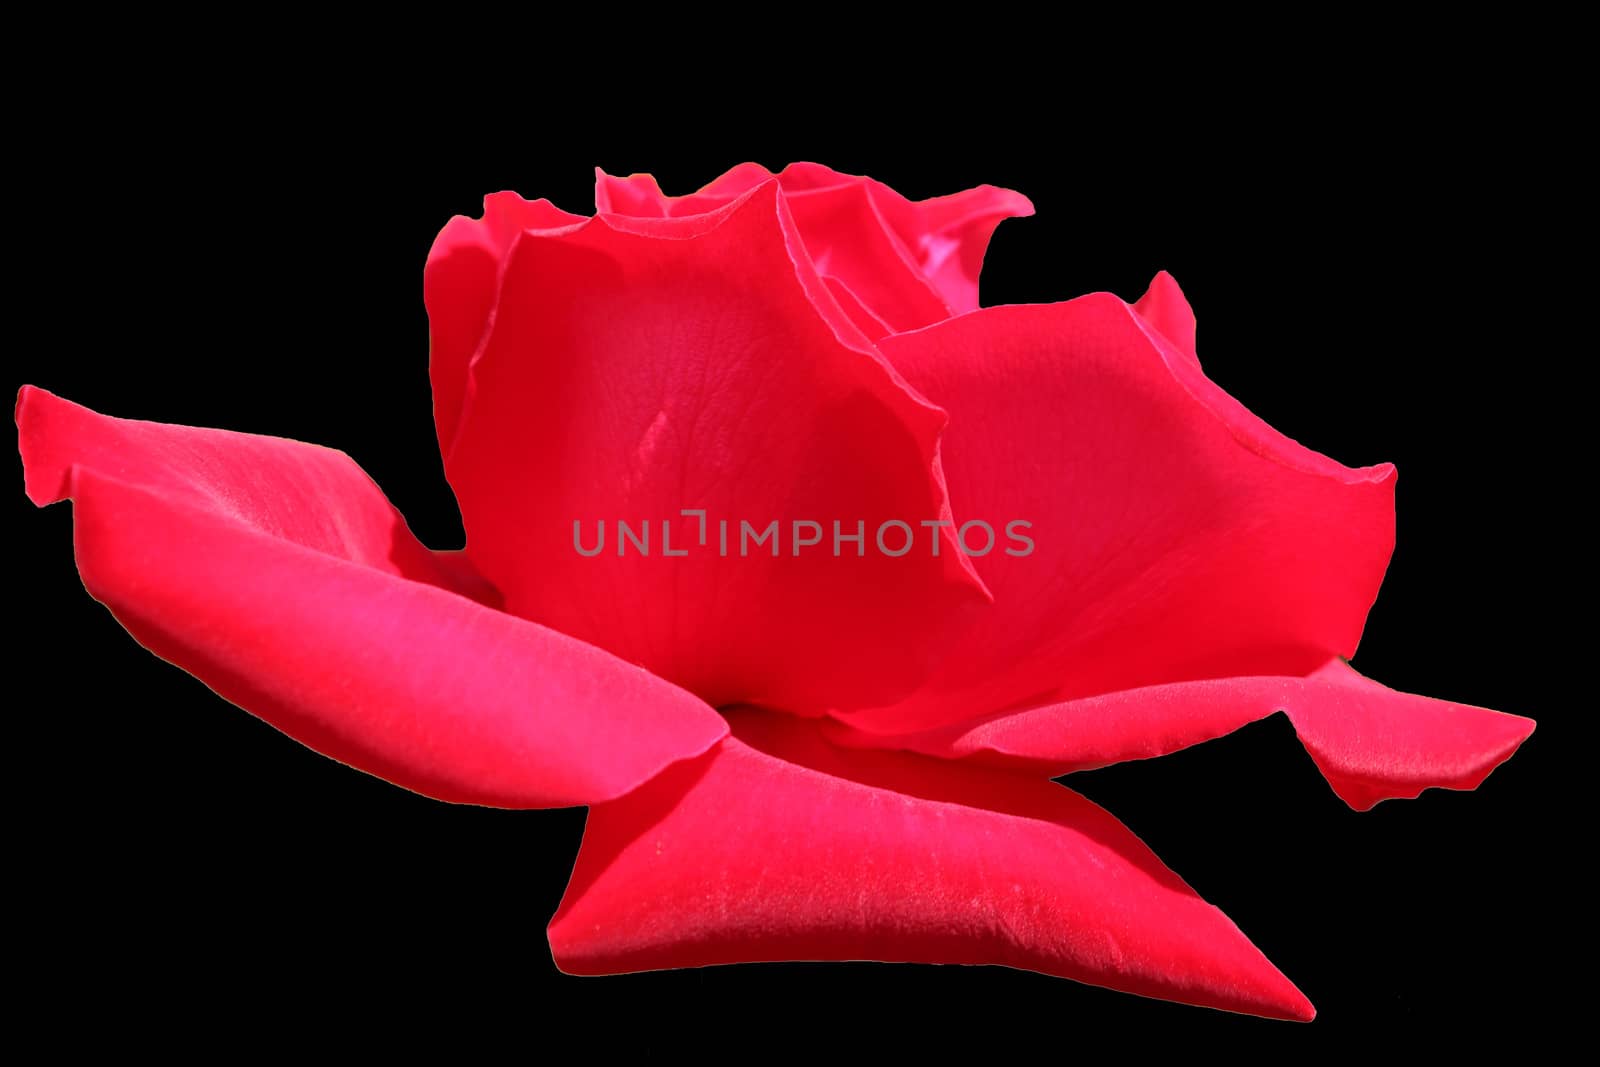 Close-up image of a red flower on a black background.